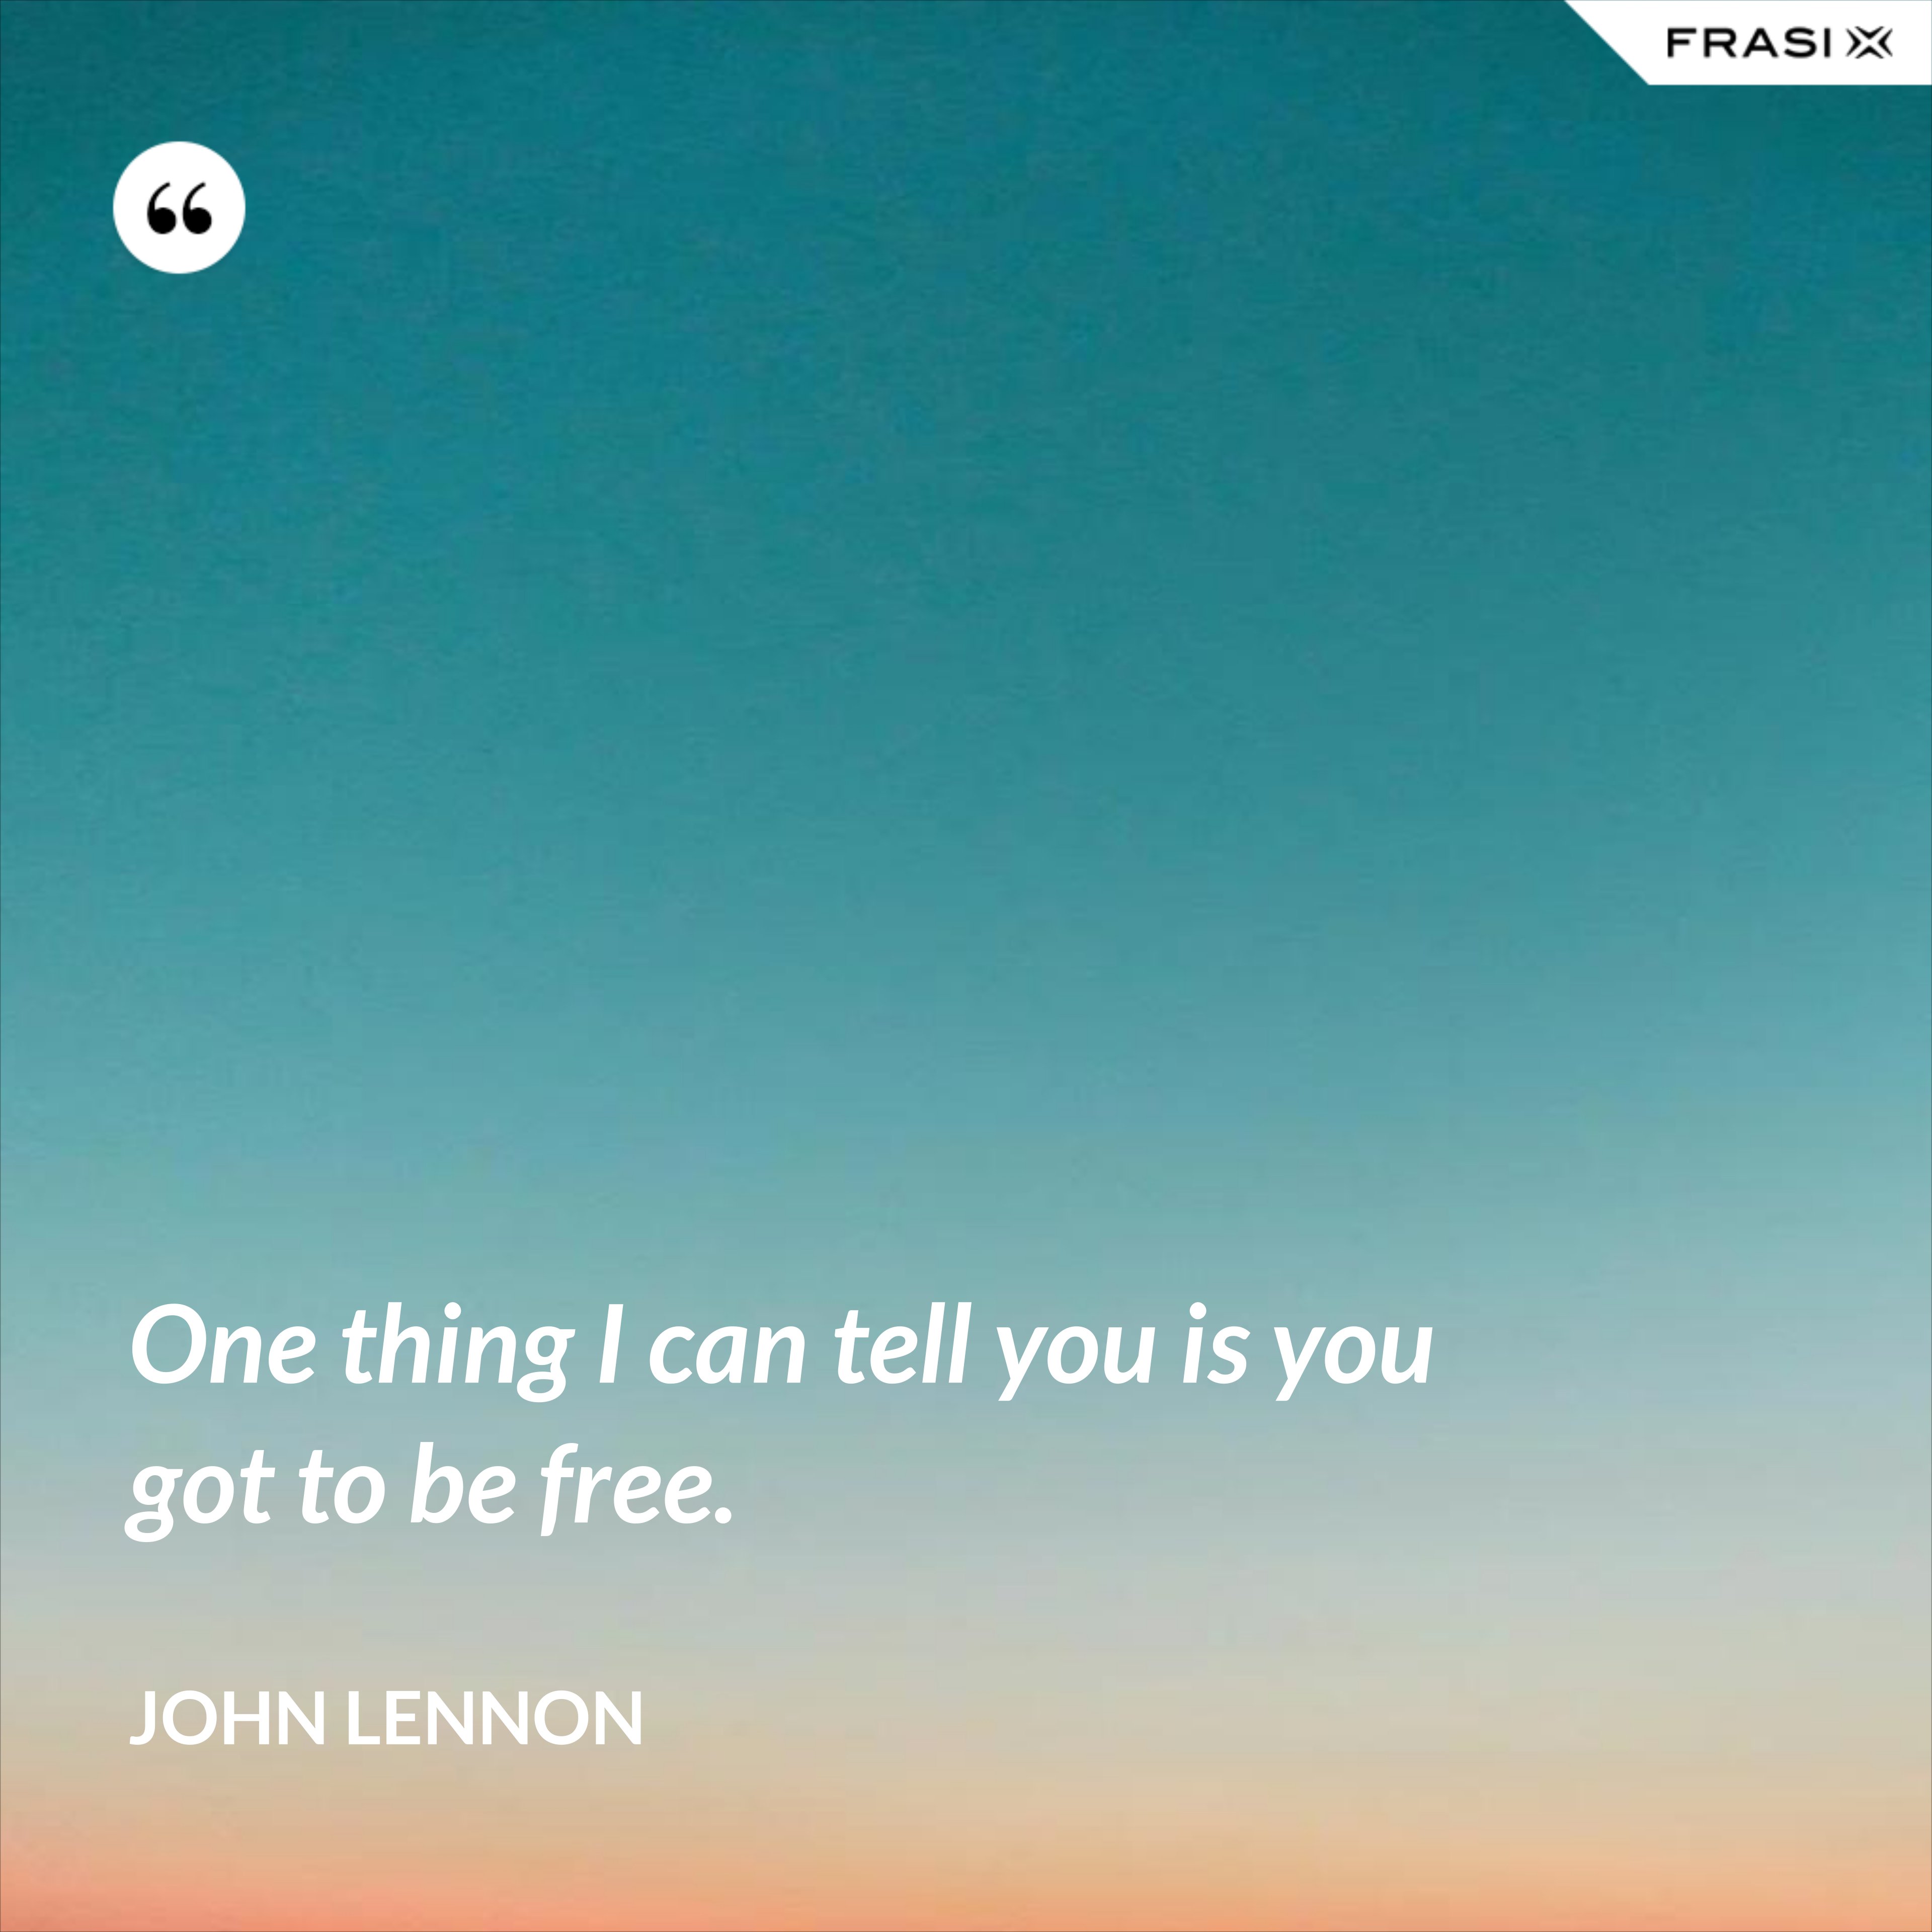 One thing I can tell you is you got to be free. - John Lennon